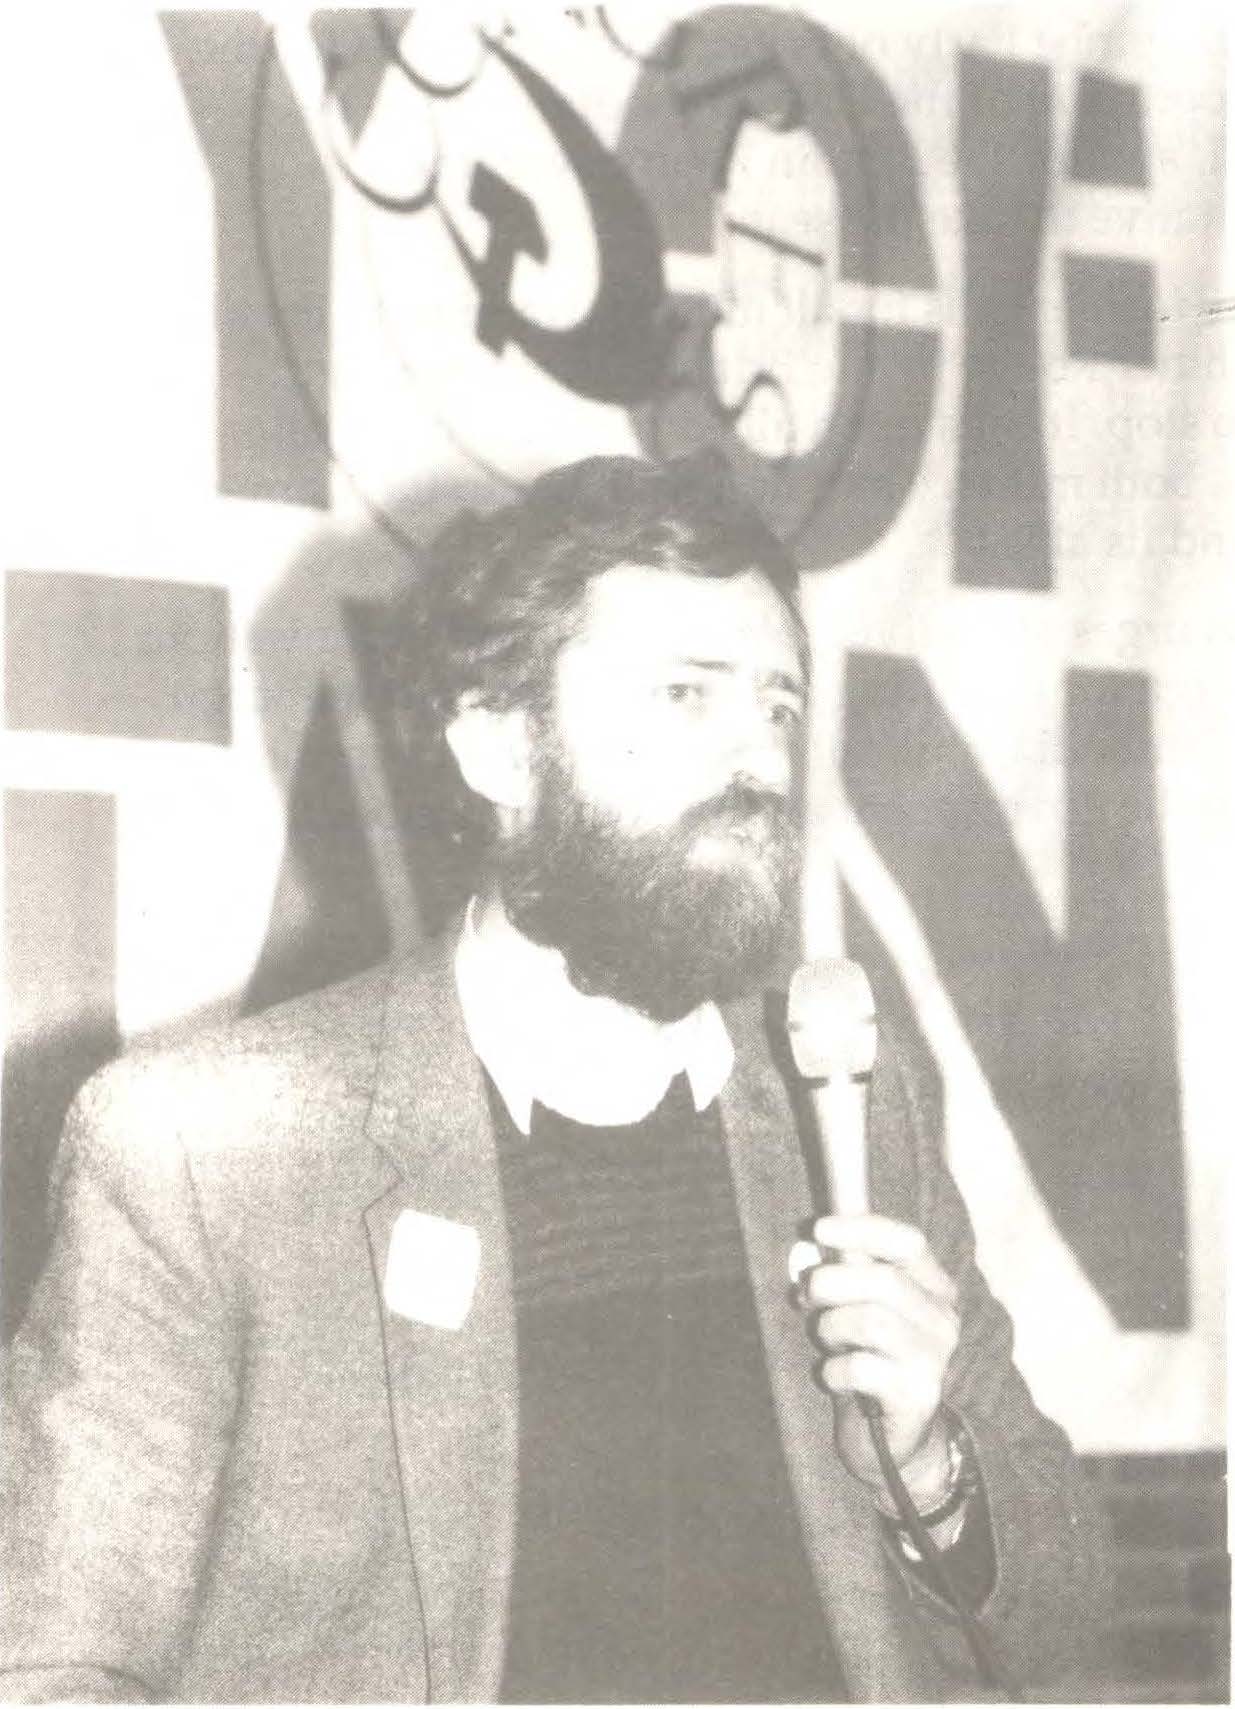 Jeremy Corbyn MP welcoming the delegates to his consistency